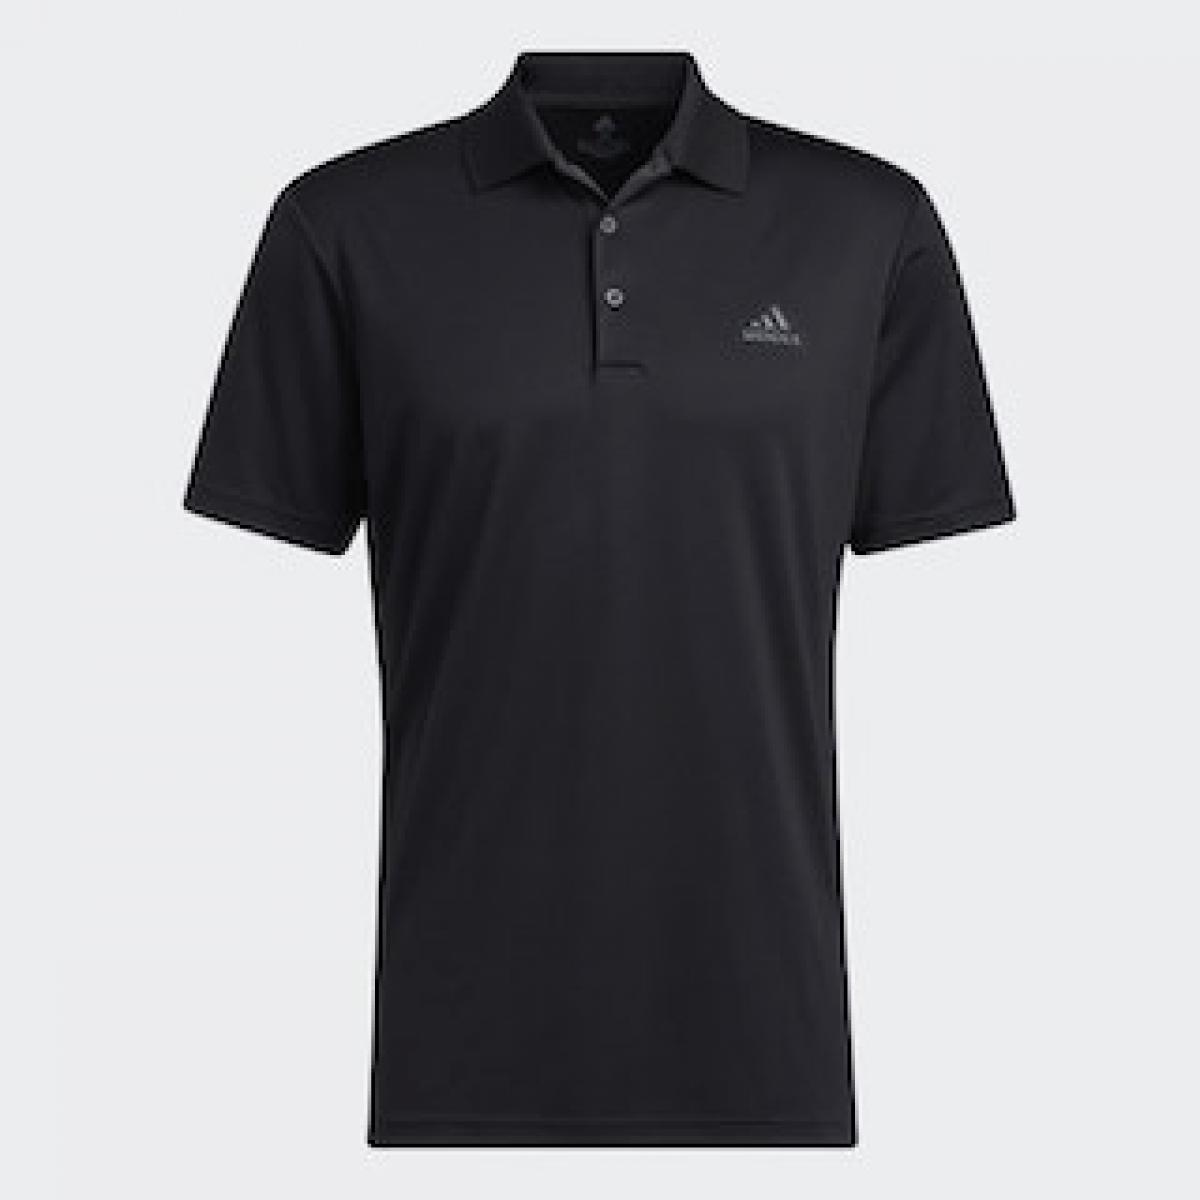 The five BEST adidas Golf shirts for 2021